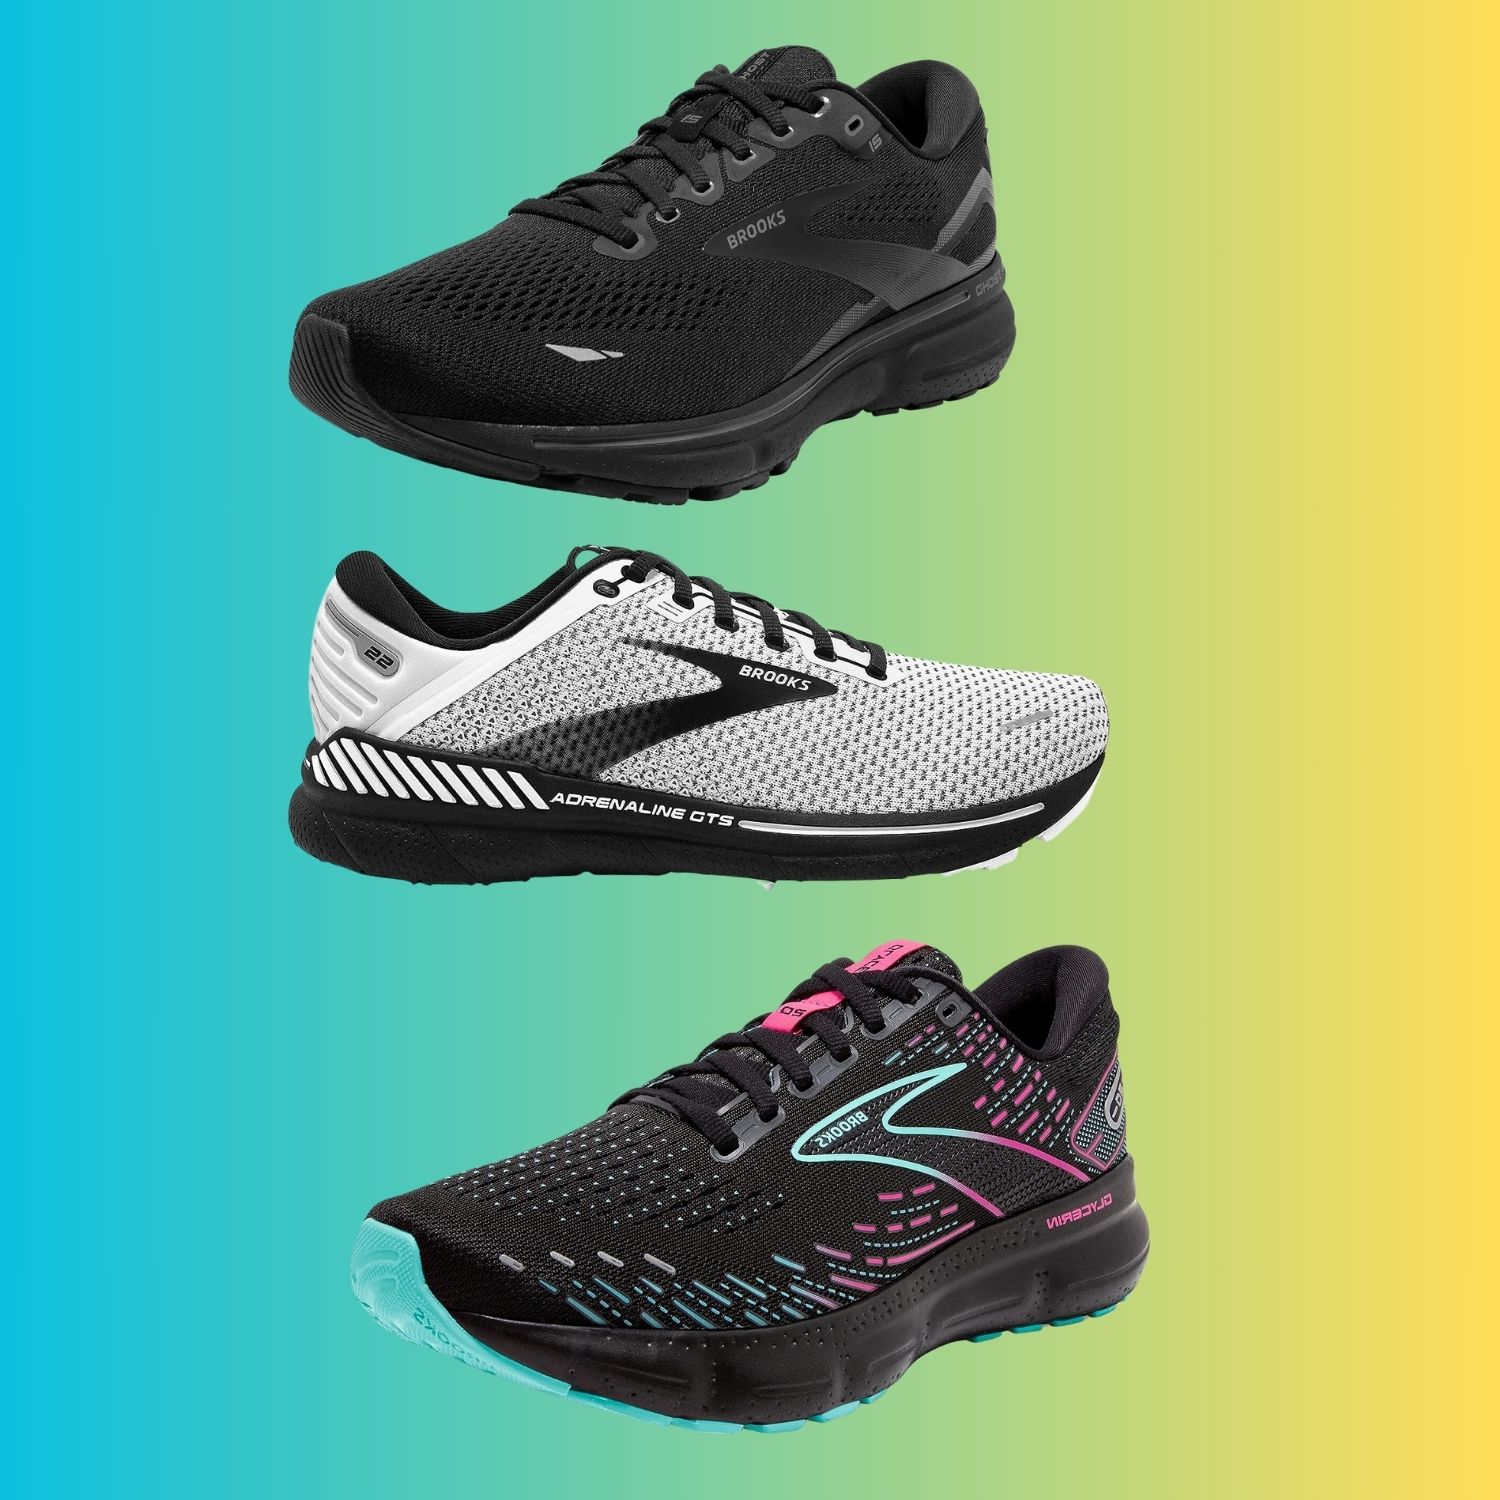 8 Best Brooks Shoes for Plantar Fasciitis: Say Goodbye to Foot Pain Forever